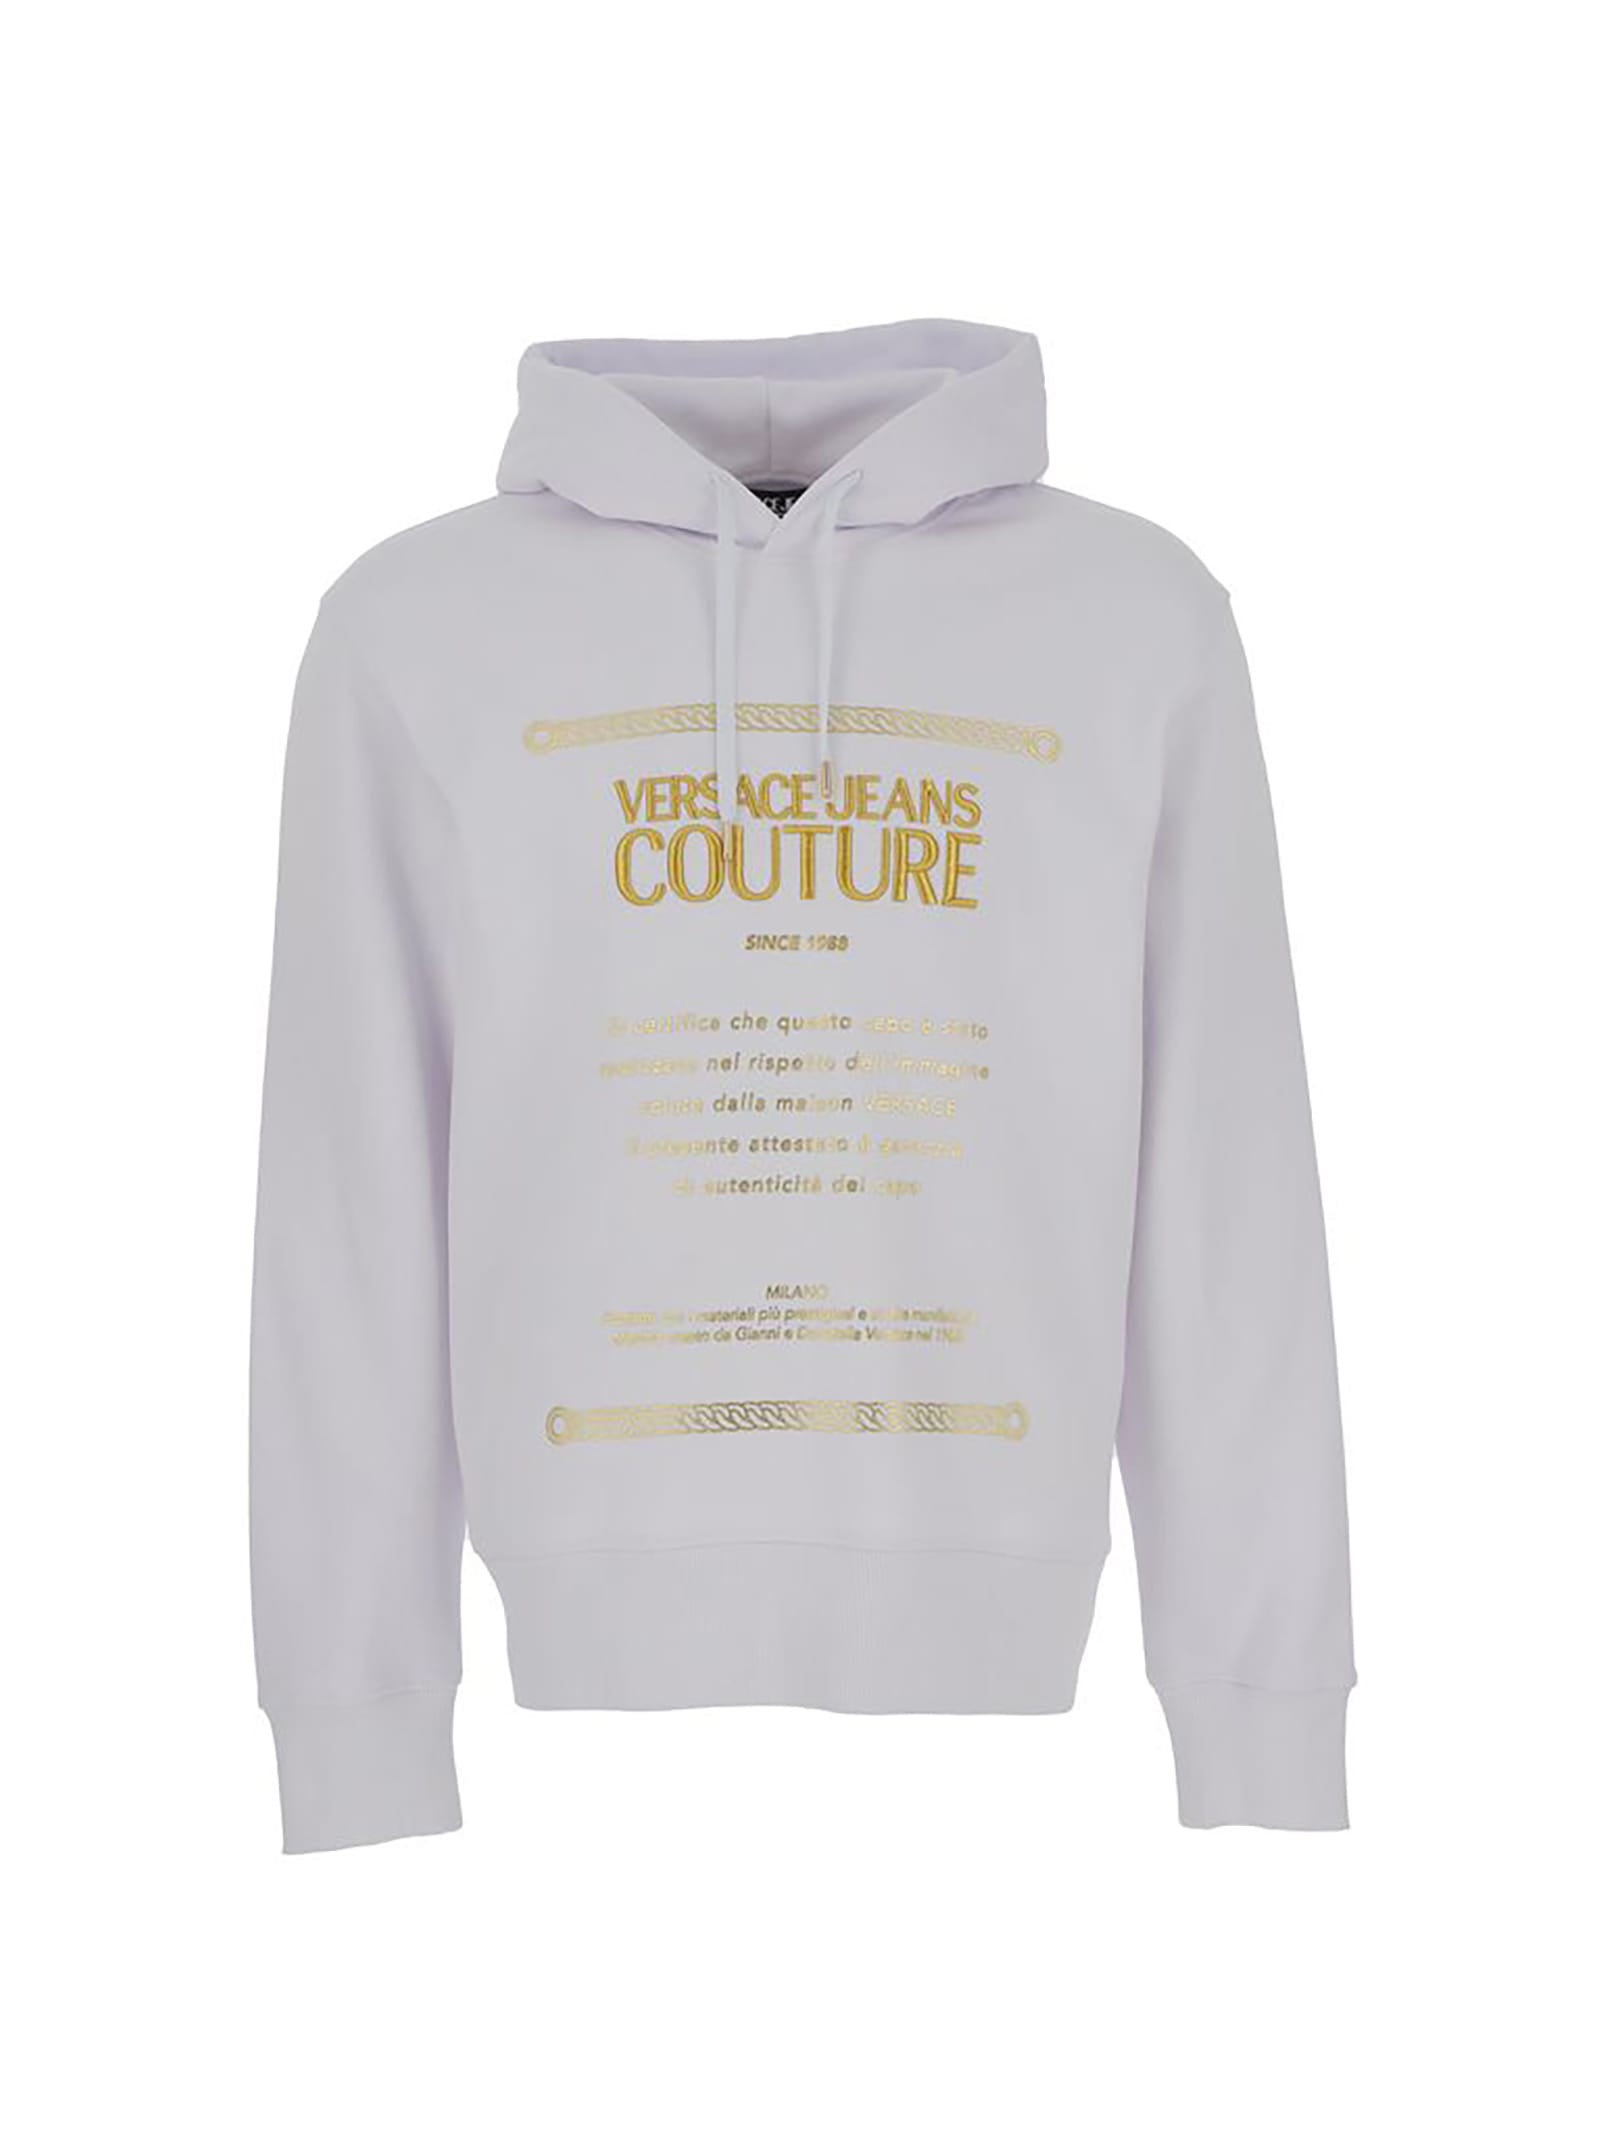 Versace Jeans Couture Sweatshirtcotton Raised Neck Brand Name Front